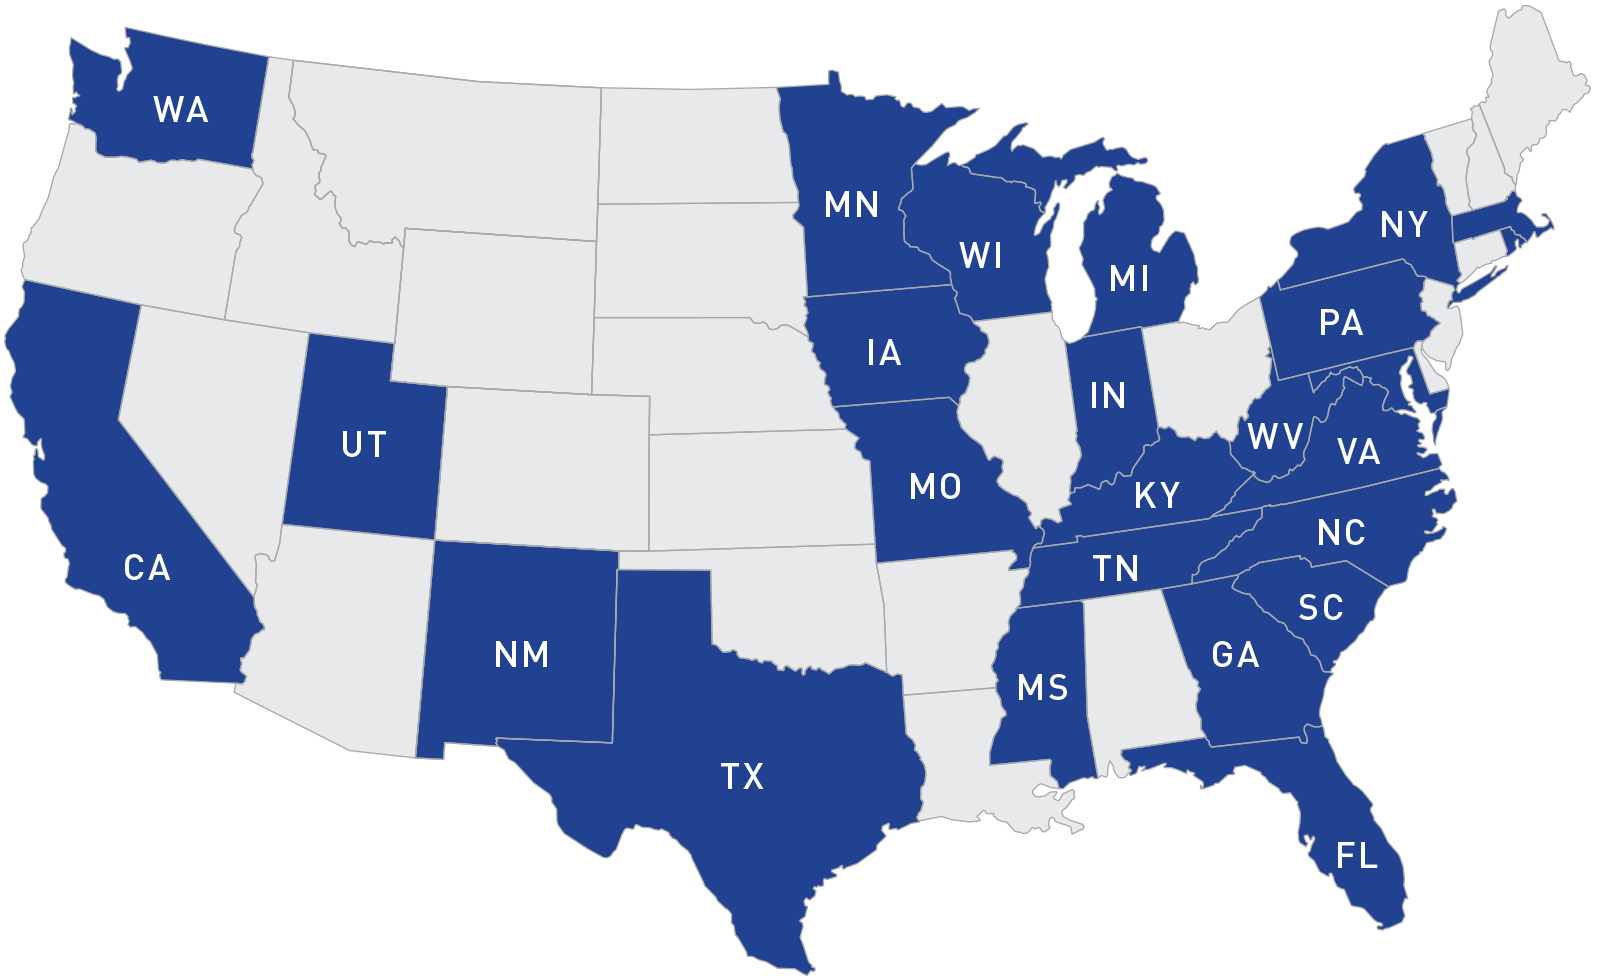 States Participating in the Rapid Response Team (RRT) Program from 2008 - 2018